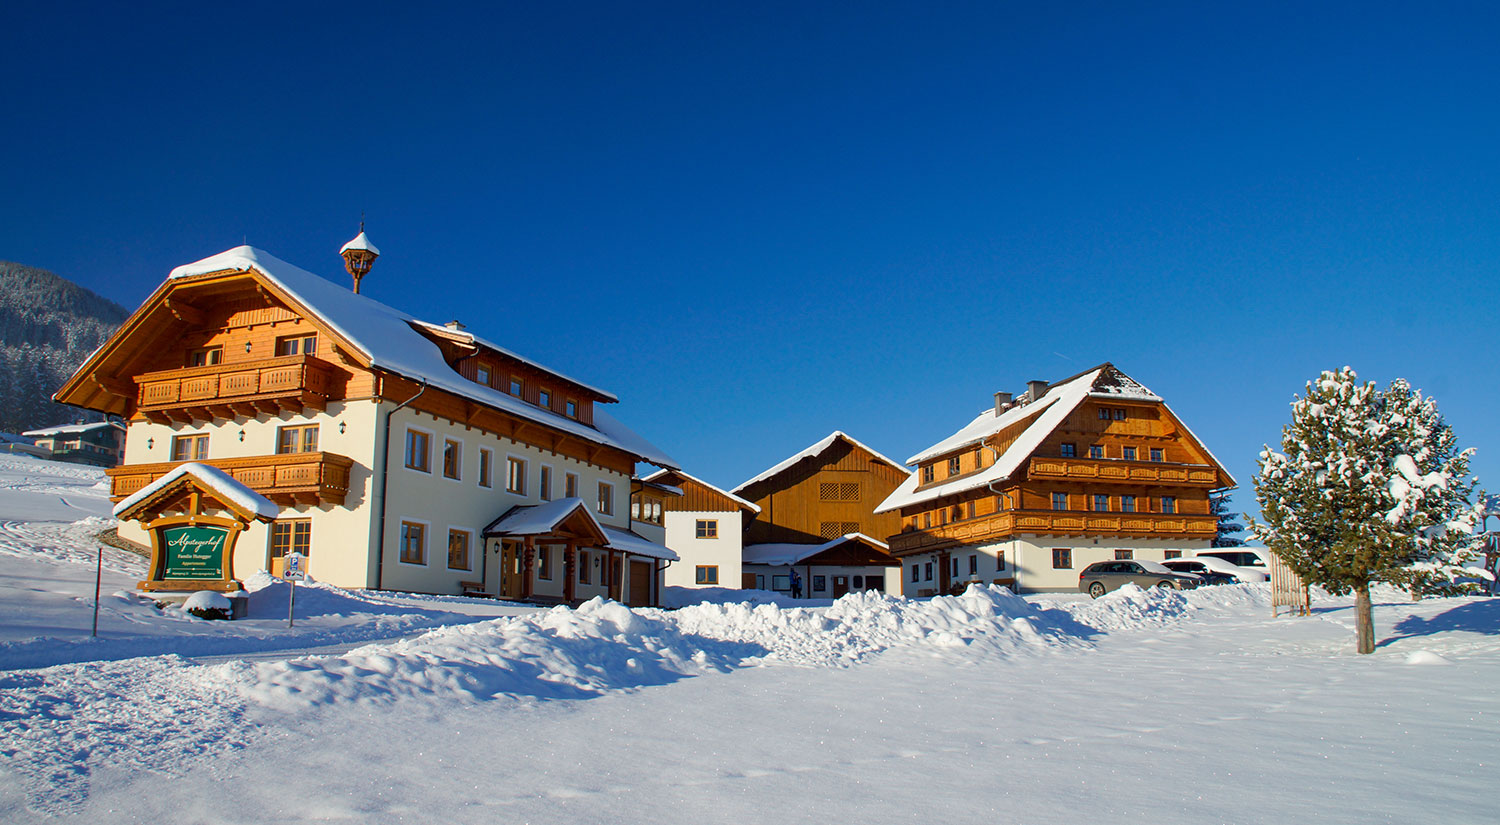 a dream day at the Alpstegerhof and on the slopes of Schladming